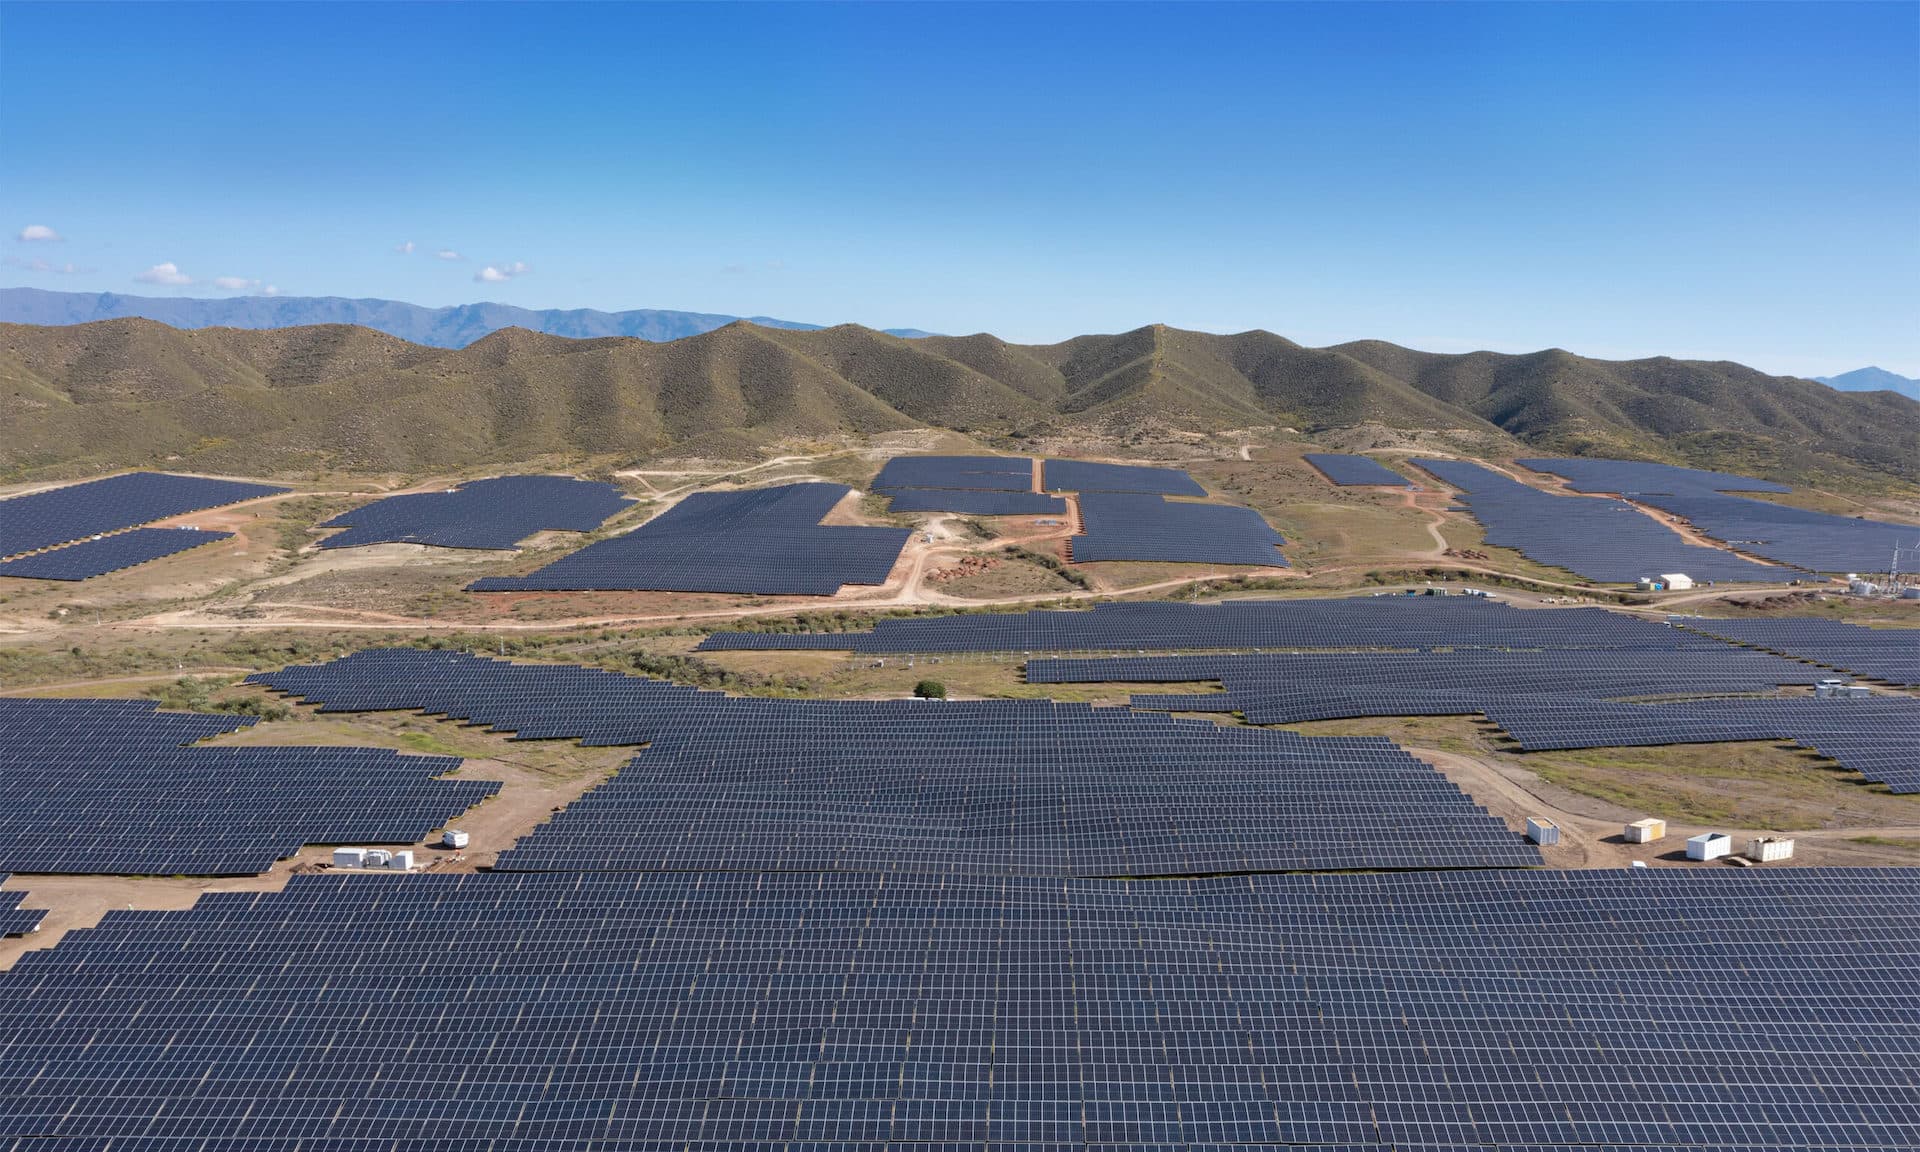 Solar plant from above with green mountains and blue sky in the background.